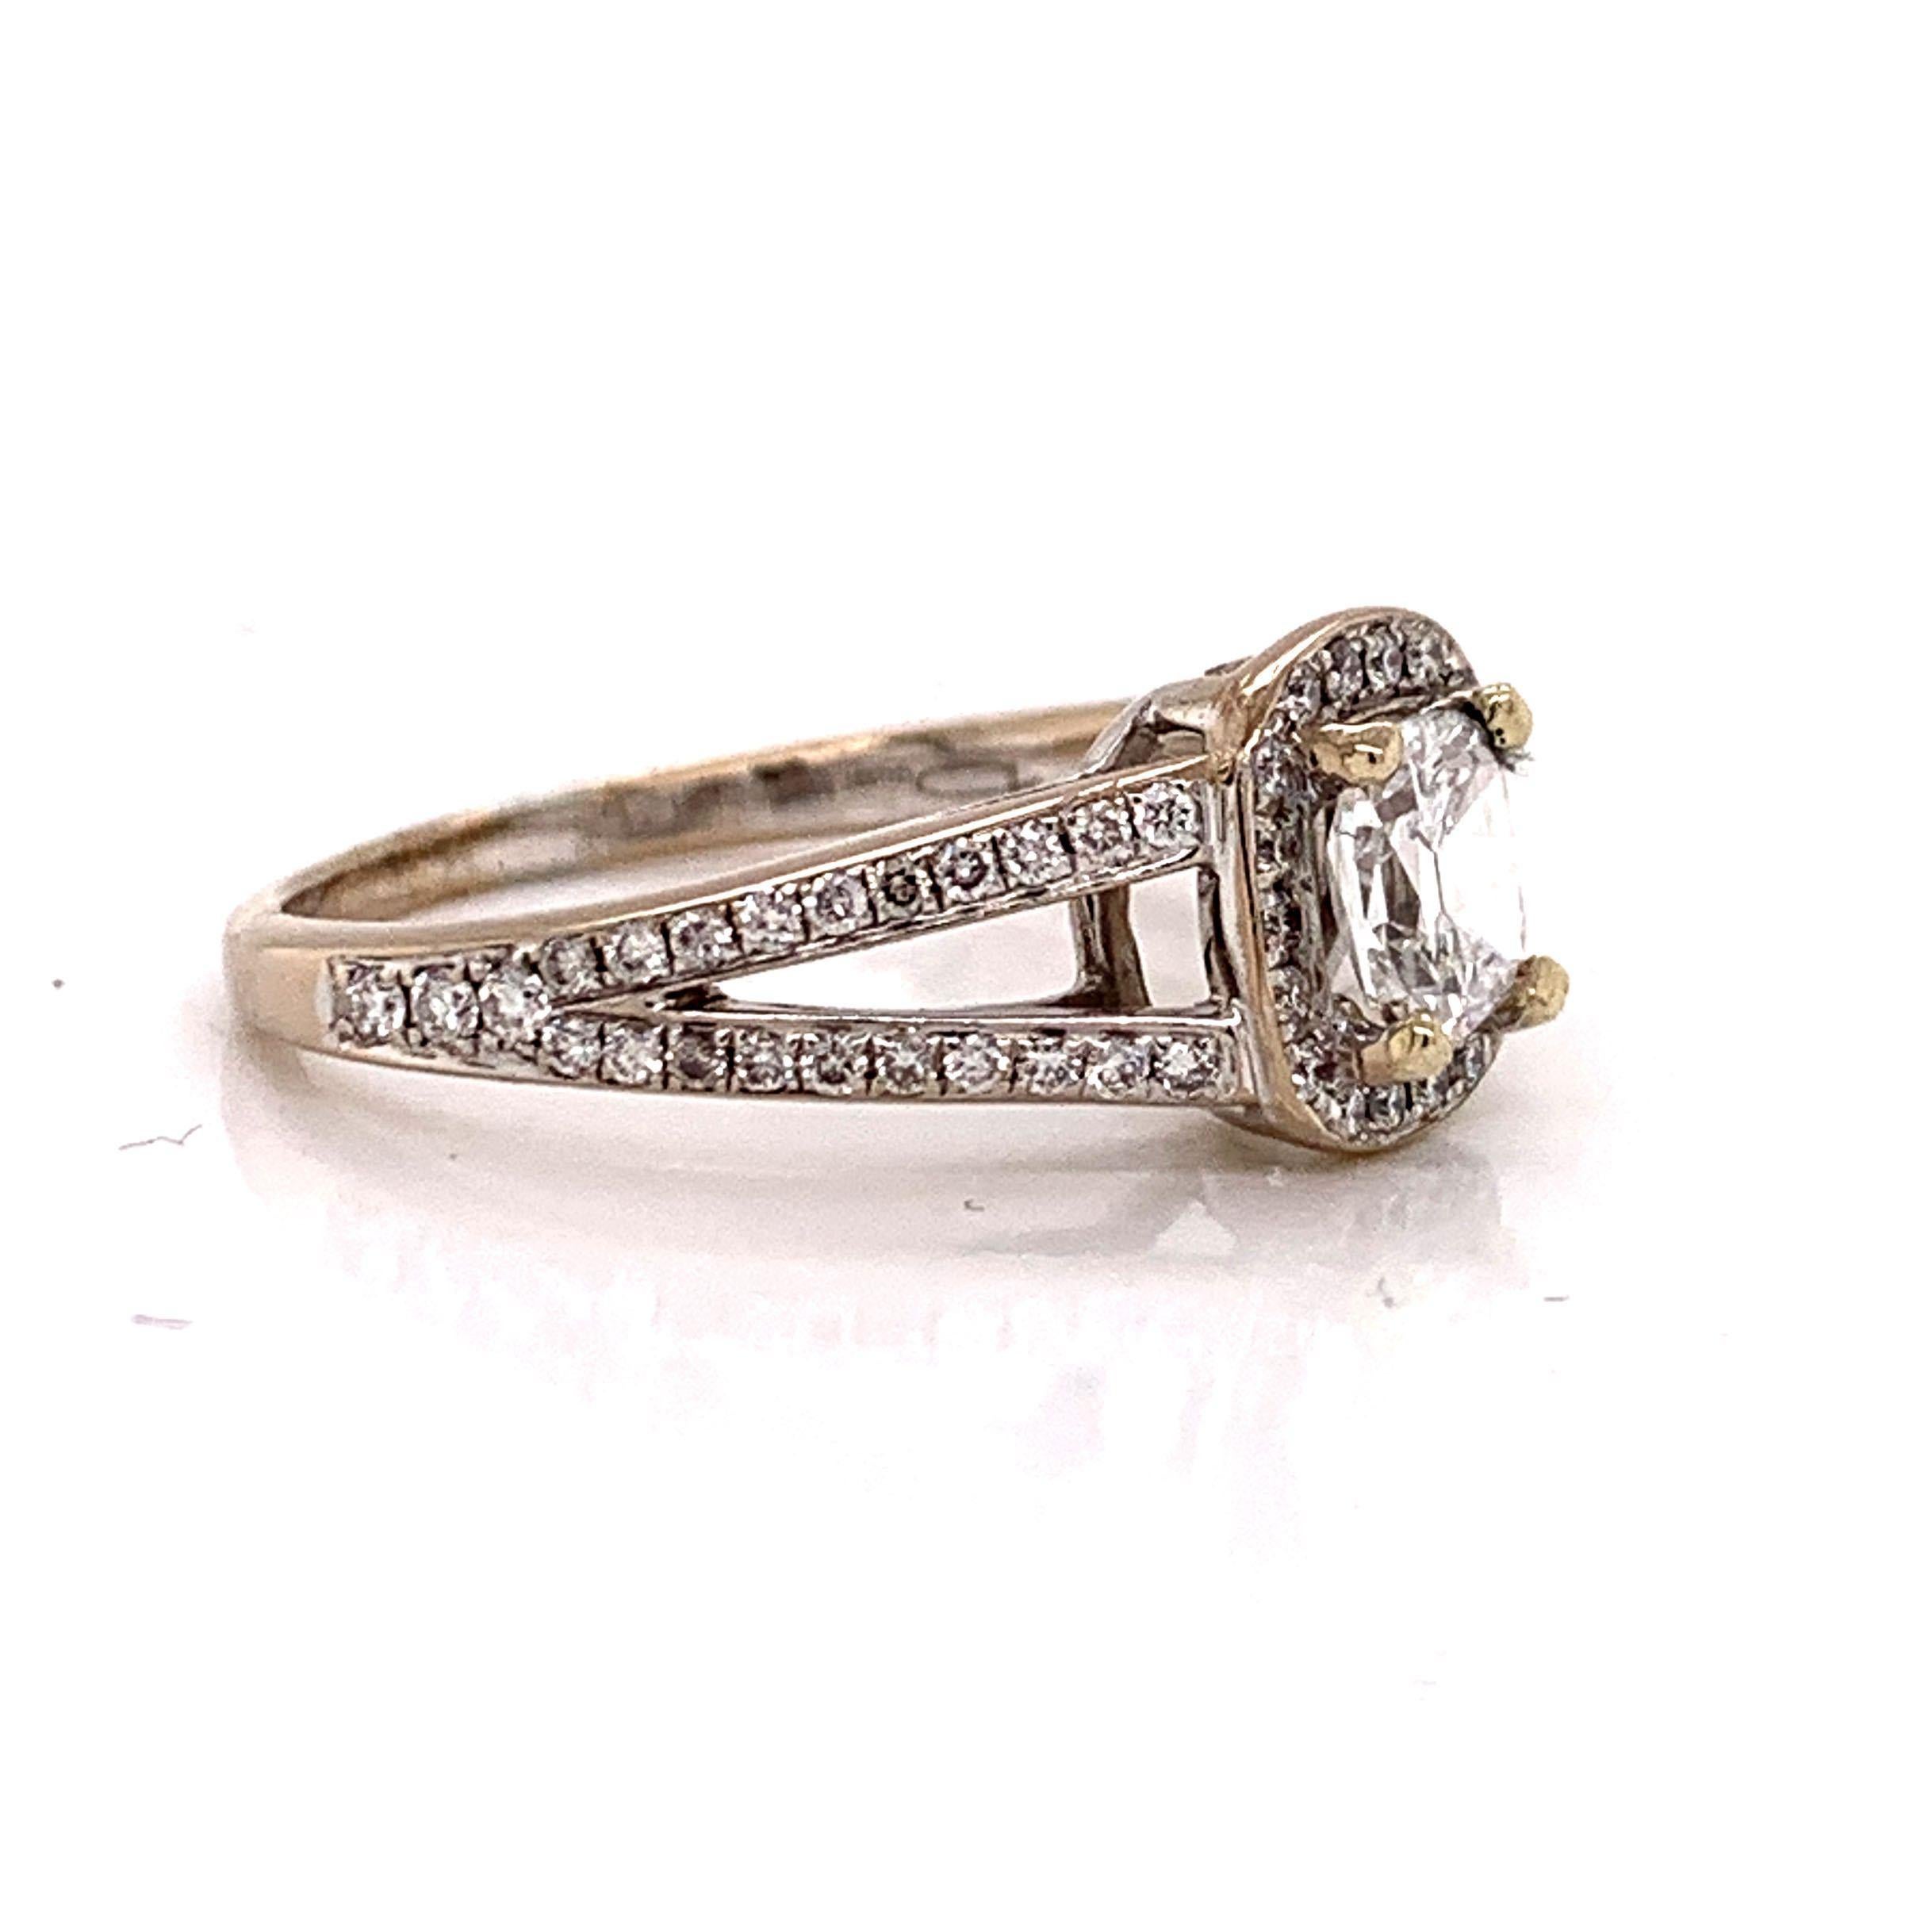 Henri Daussi 18k White Gold Diamond Cushion Cut Engagement Ring Size 6.5

Condition:  Excellent Condition, Professionally Cleaned and Polished
Metal:  18k Gold (Marked, and Professionally Tested)
Weight:  3.9g
Center Diamond:  Cushion Cut .51ct